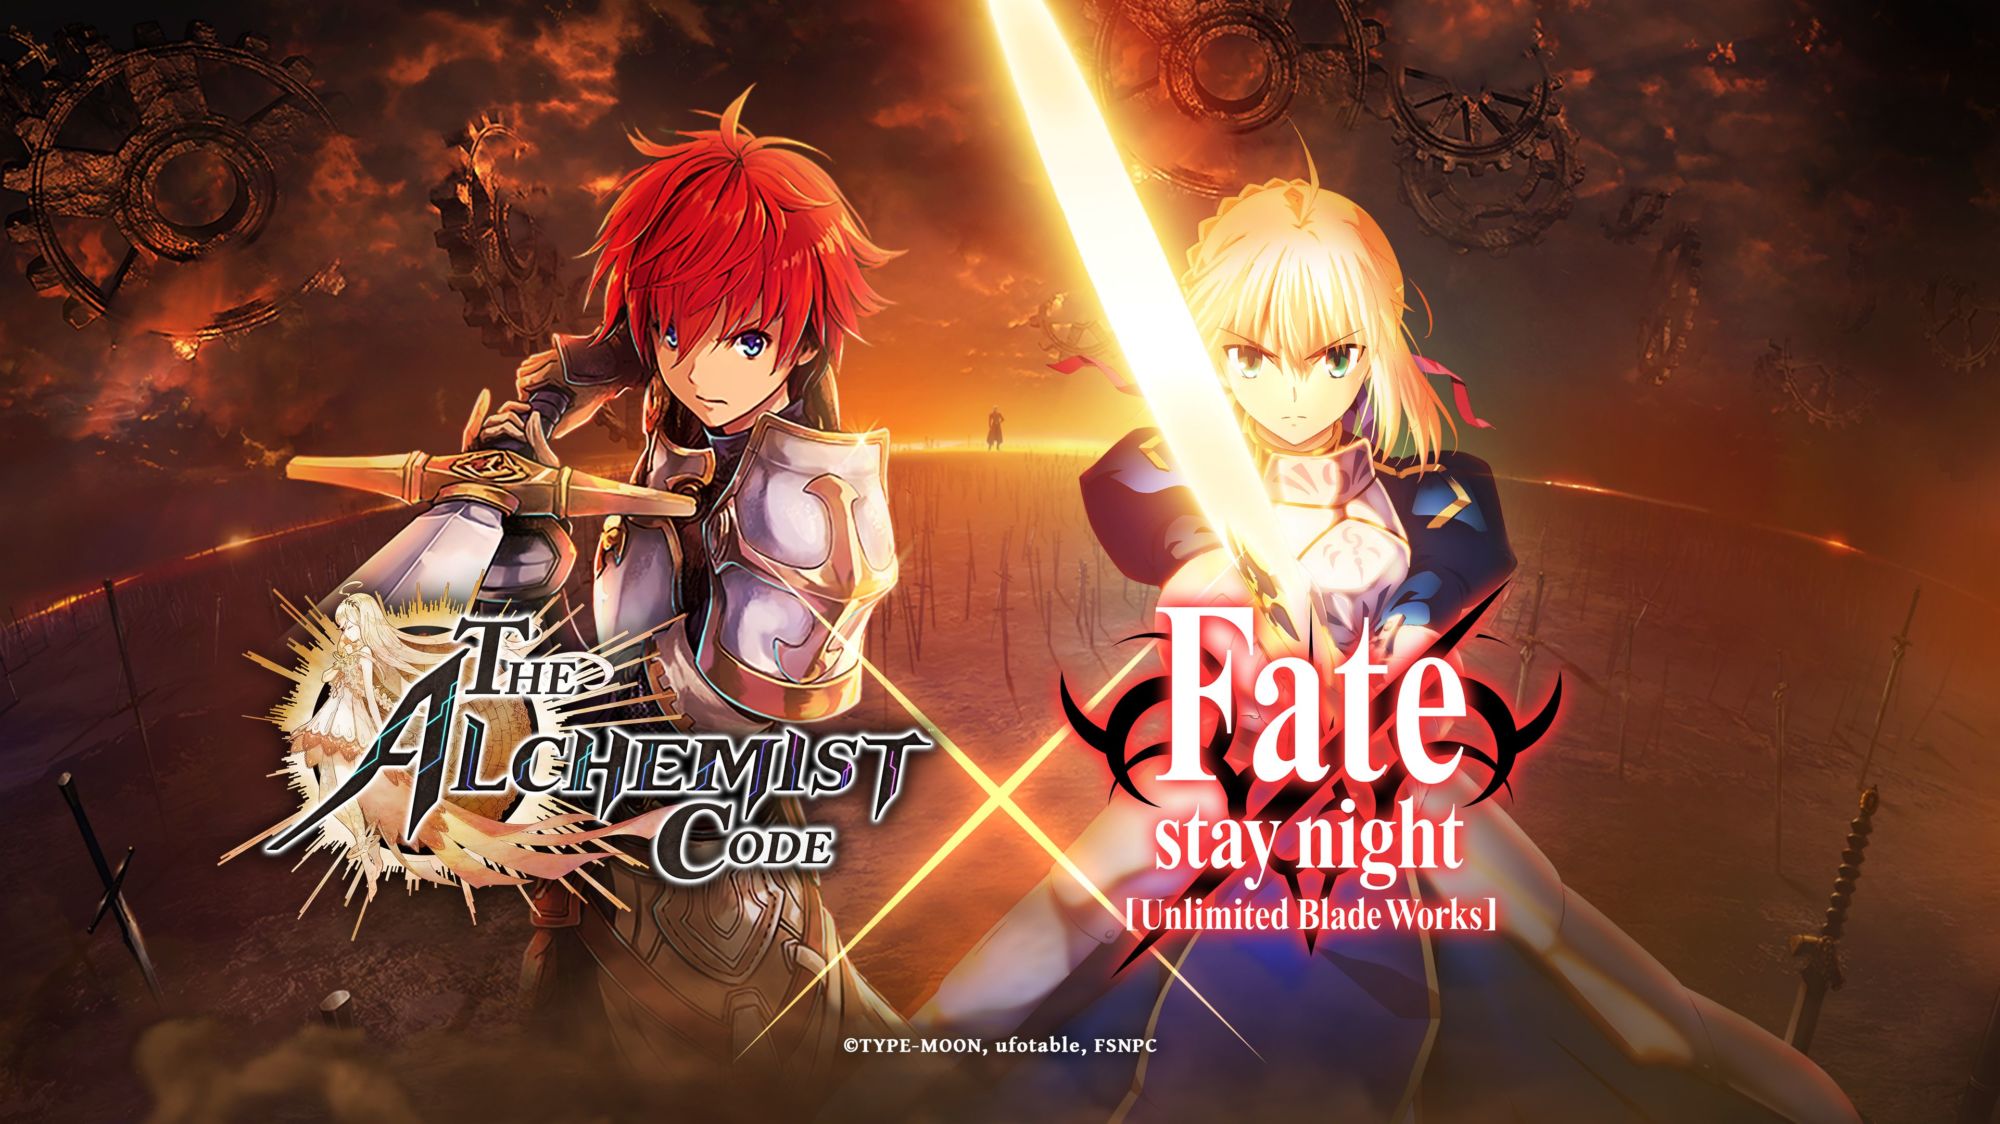 The Alchemist Code Is Getting A Crossover With Fate Stay